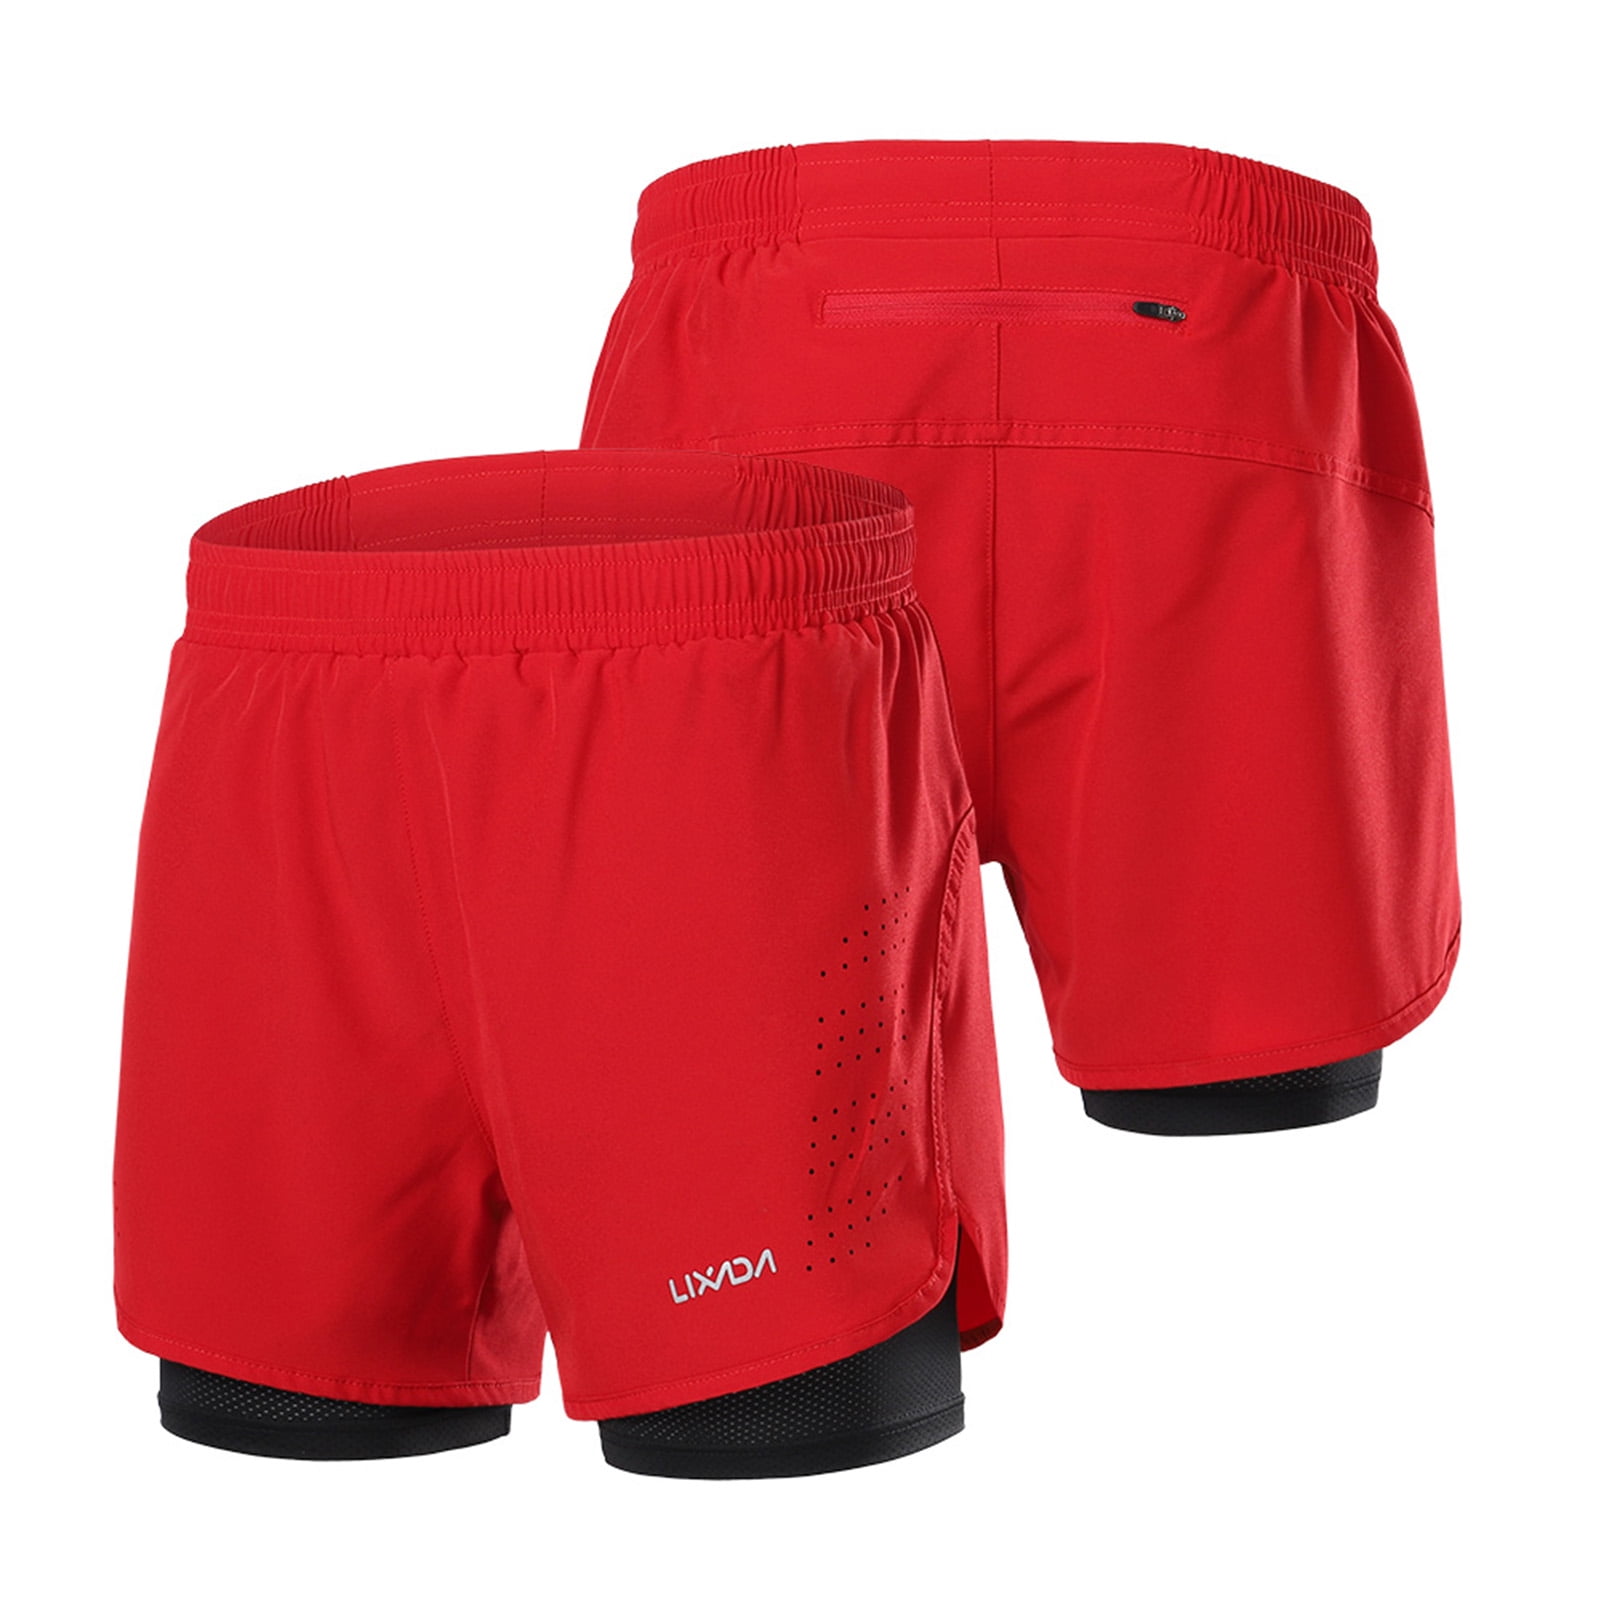 Men's 2-in-1 Running Shorts Quick Drying Breathable Training Exercise Jogging 